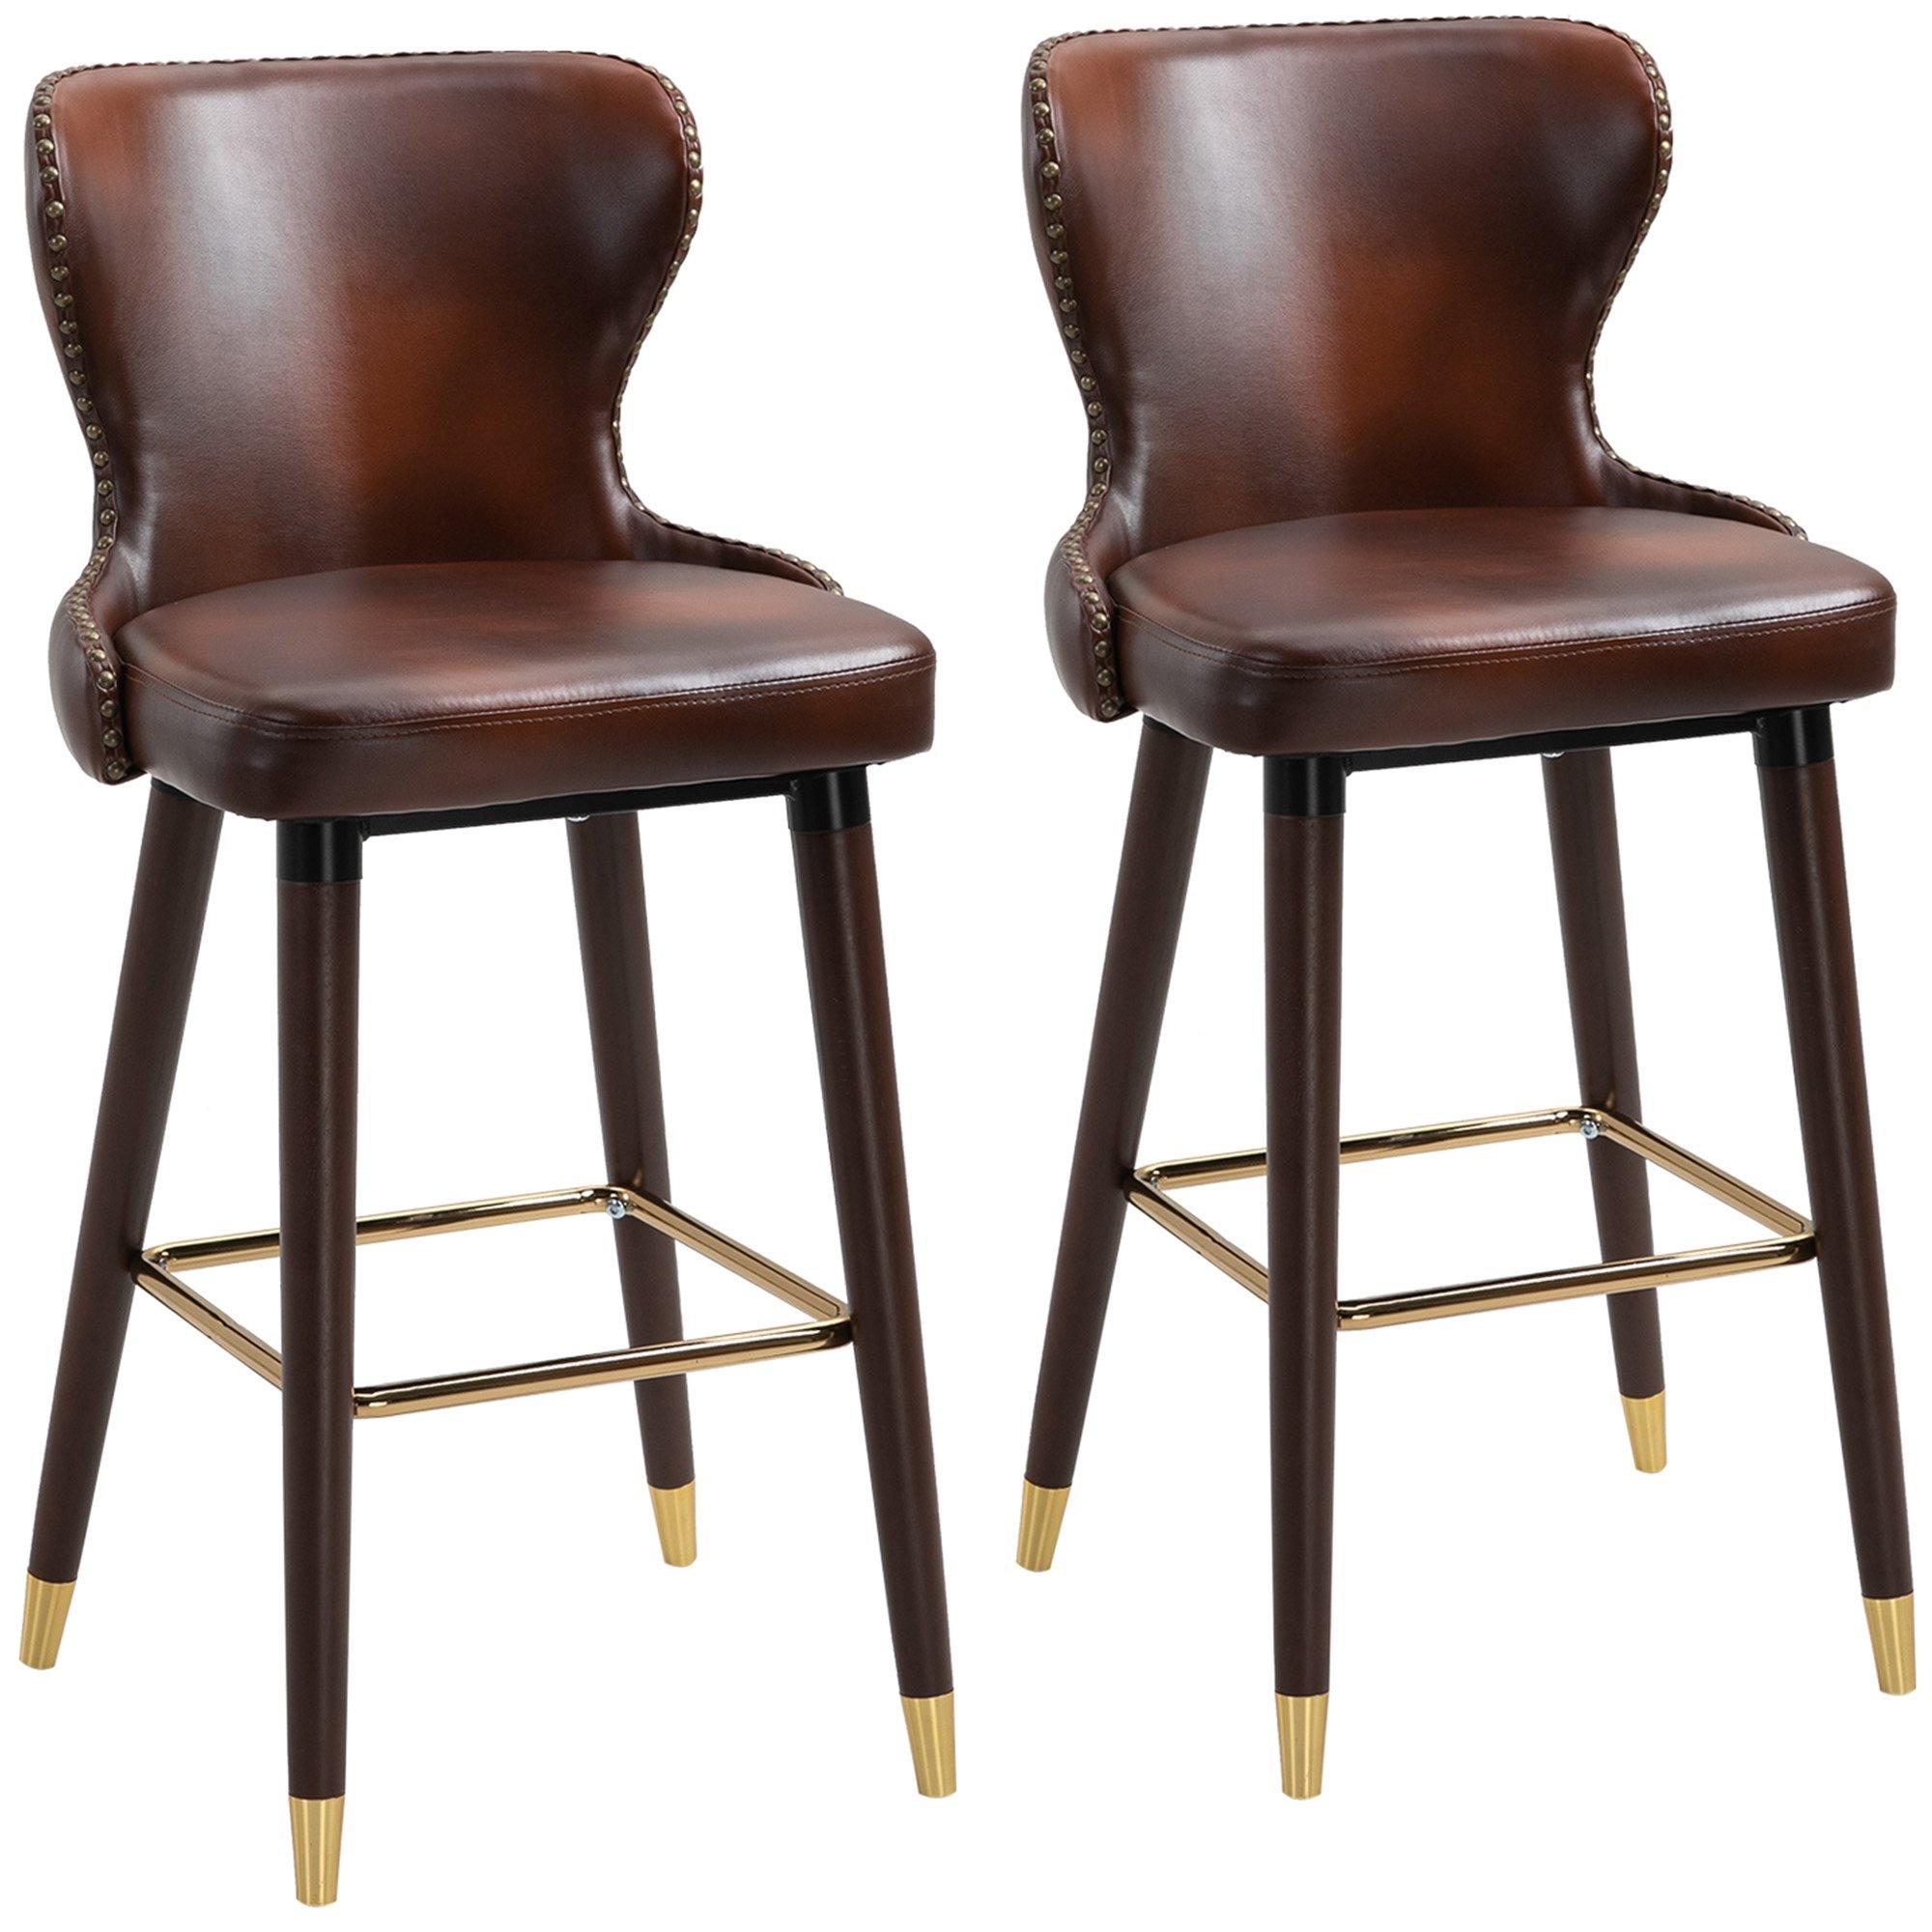 2 Pieces Home Luxury Bar Chair Stool PU Leather European Style